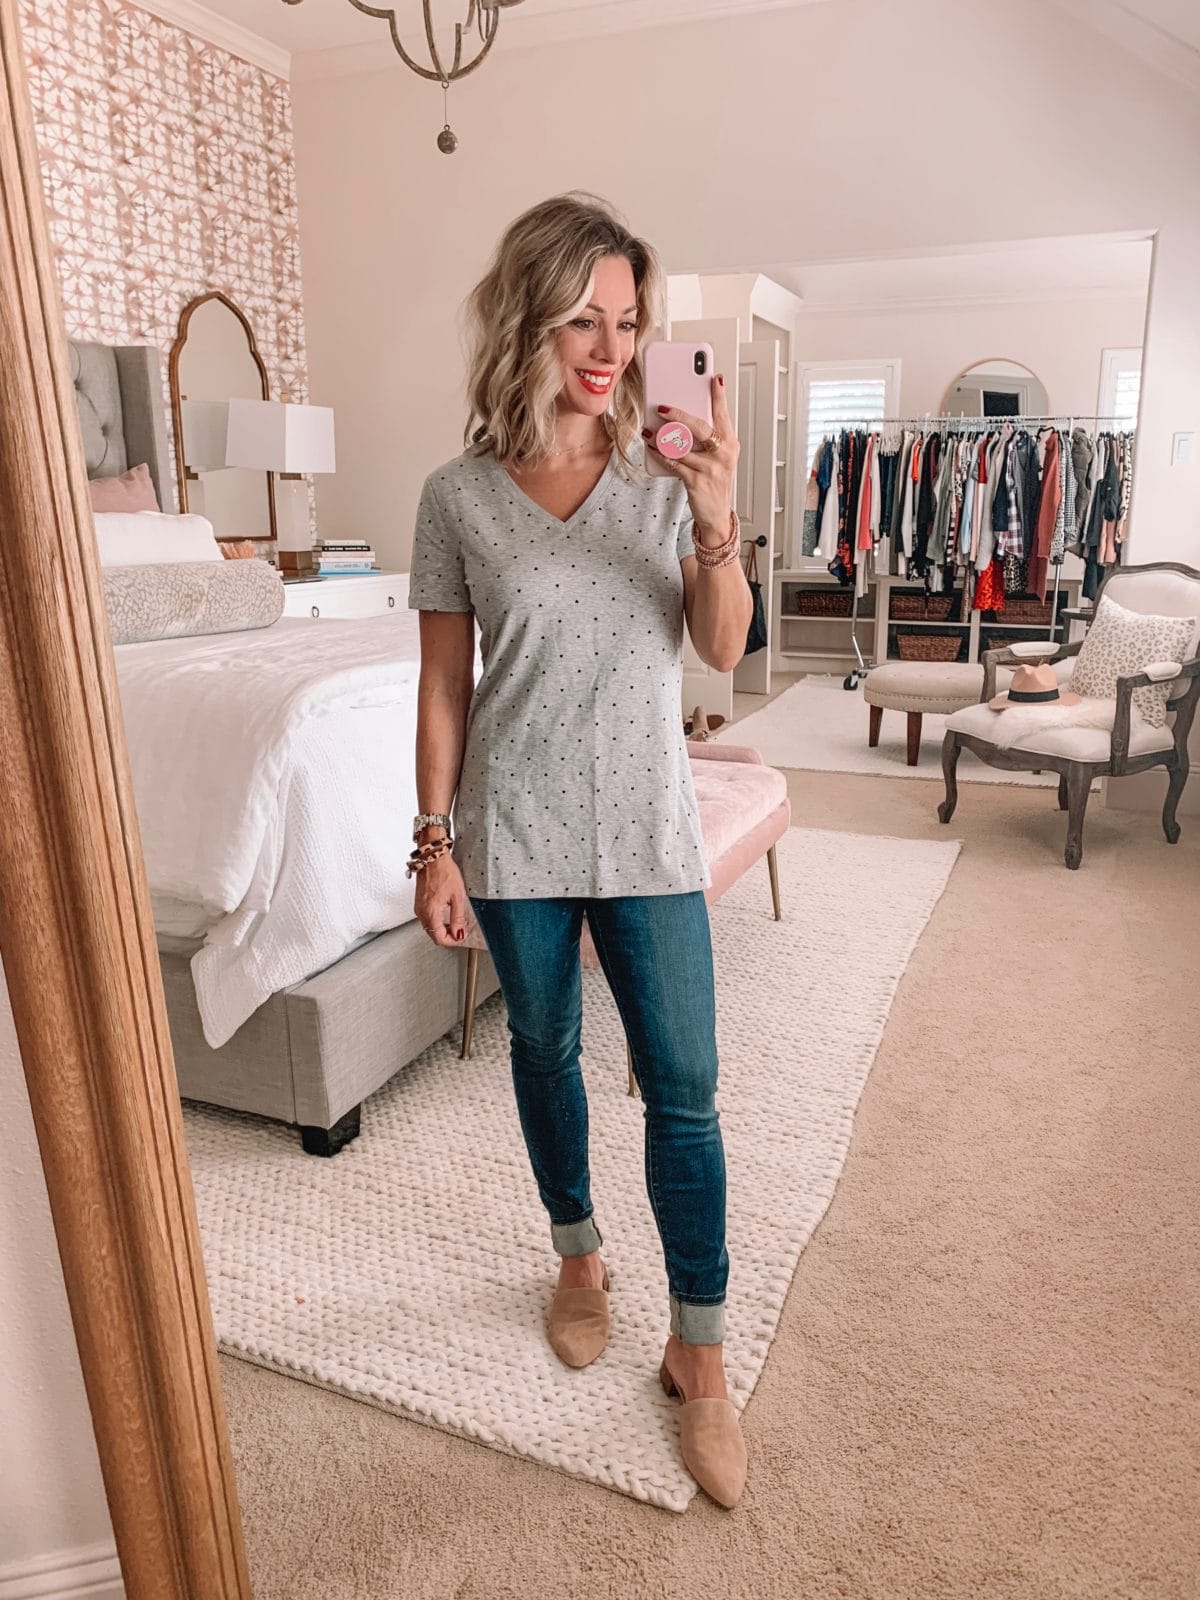 Amazon Prime Fashion- Heart Top and Jeans 